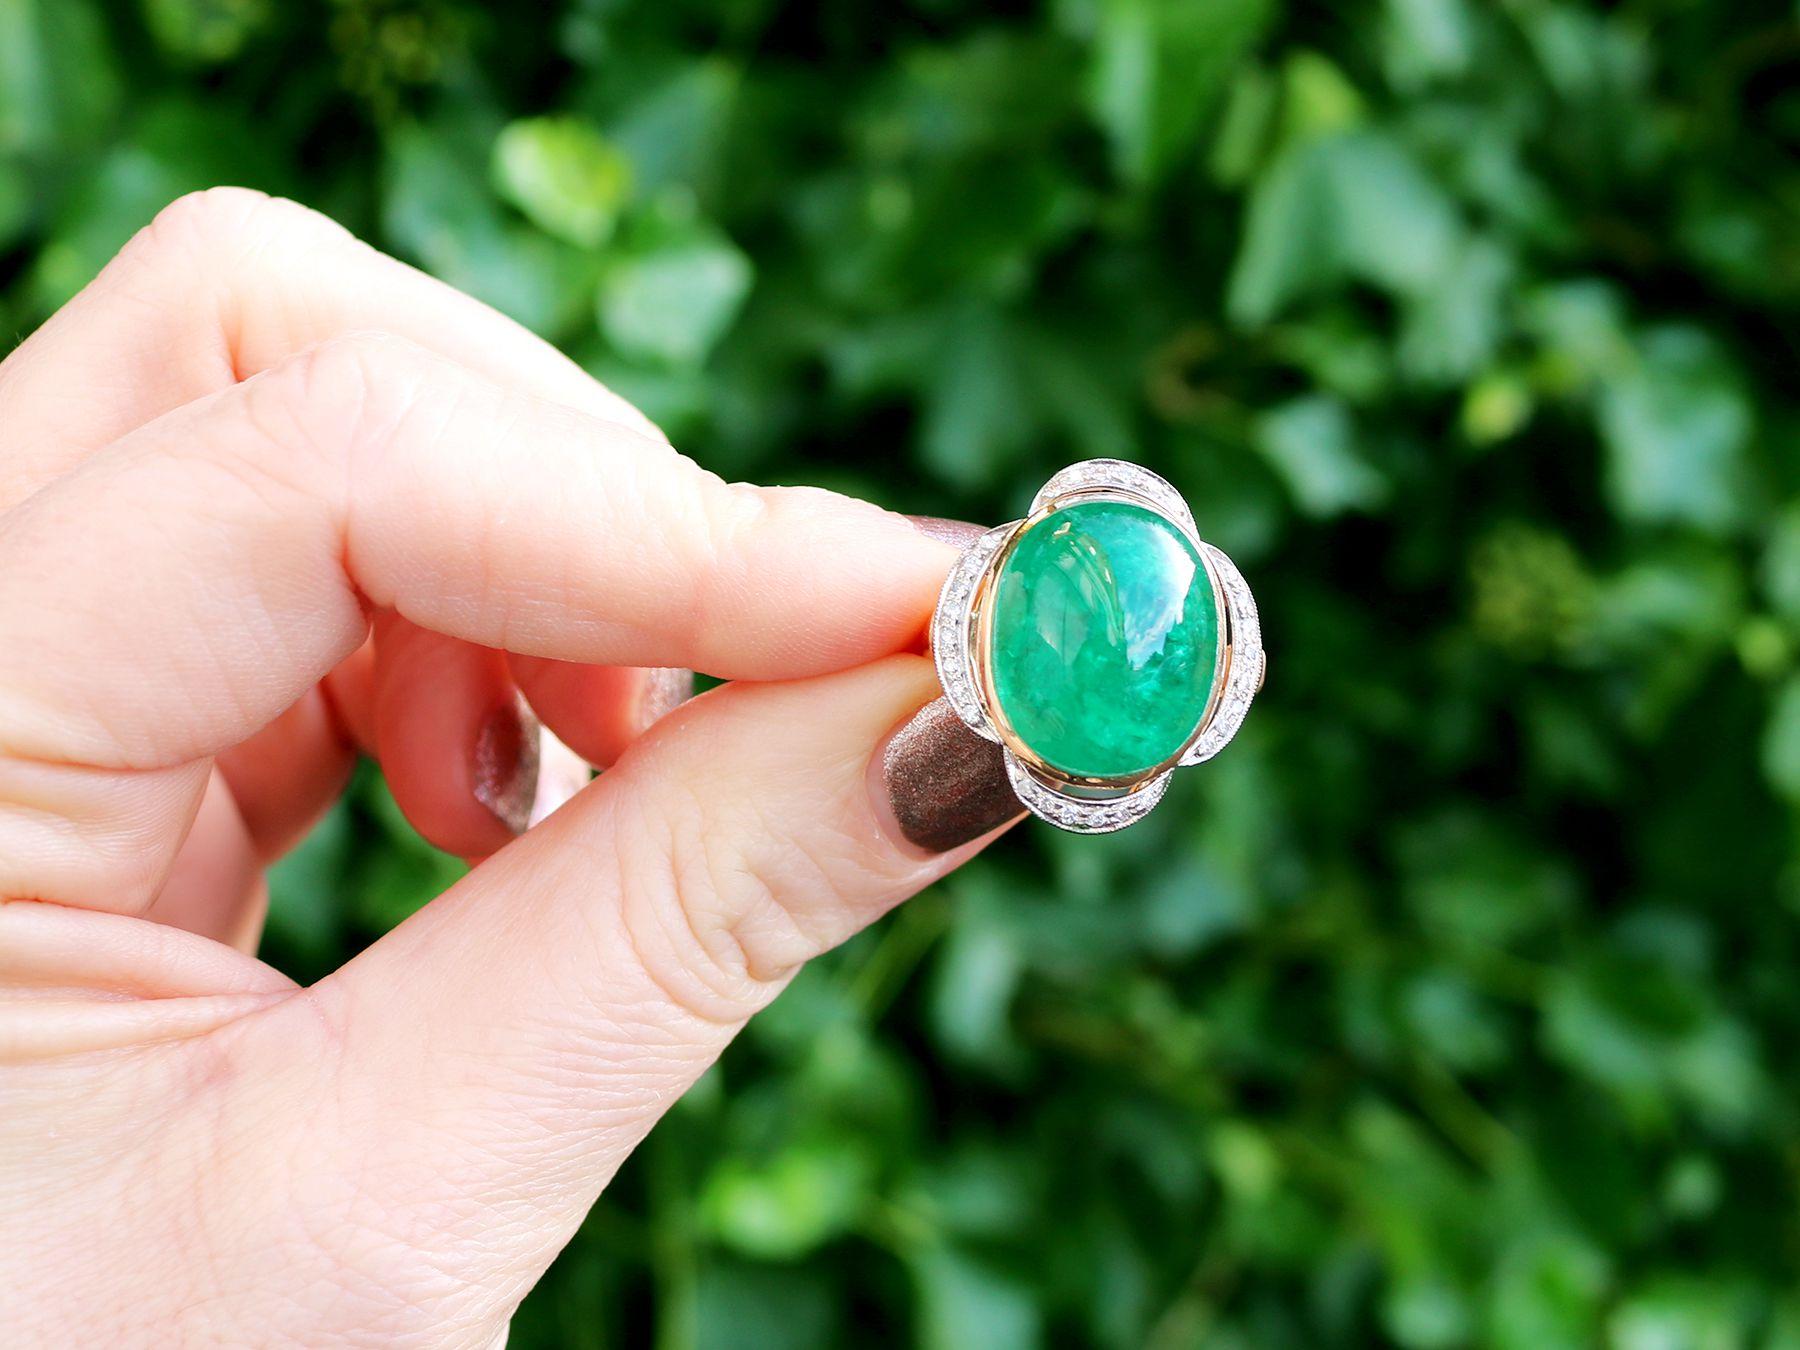 A stunning and impressive 14.5 carat emerald cabochon and 0.28 carat diamond, 18 karat yellow gold and white gold set cocktail ring; part of our vintage jewelry collections.

This stunning, fine and impressive cabochon cut emerald ring has been